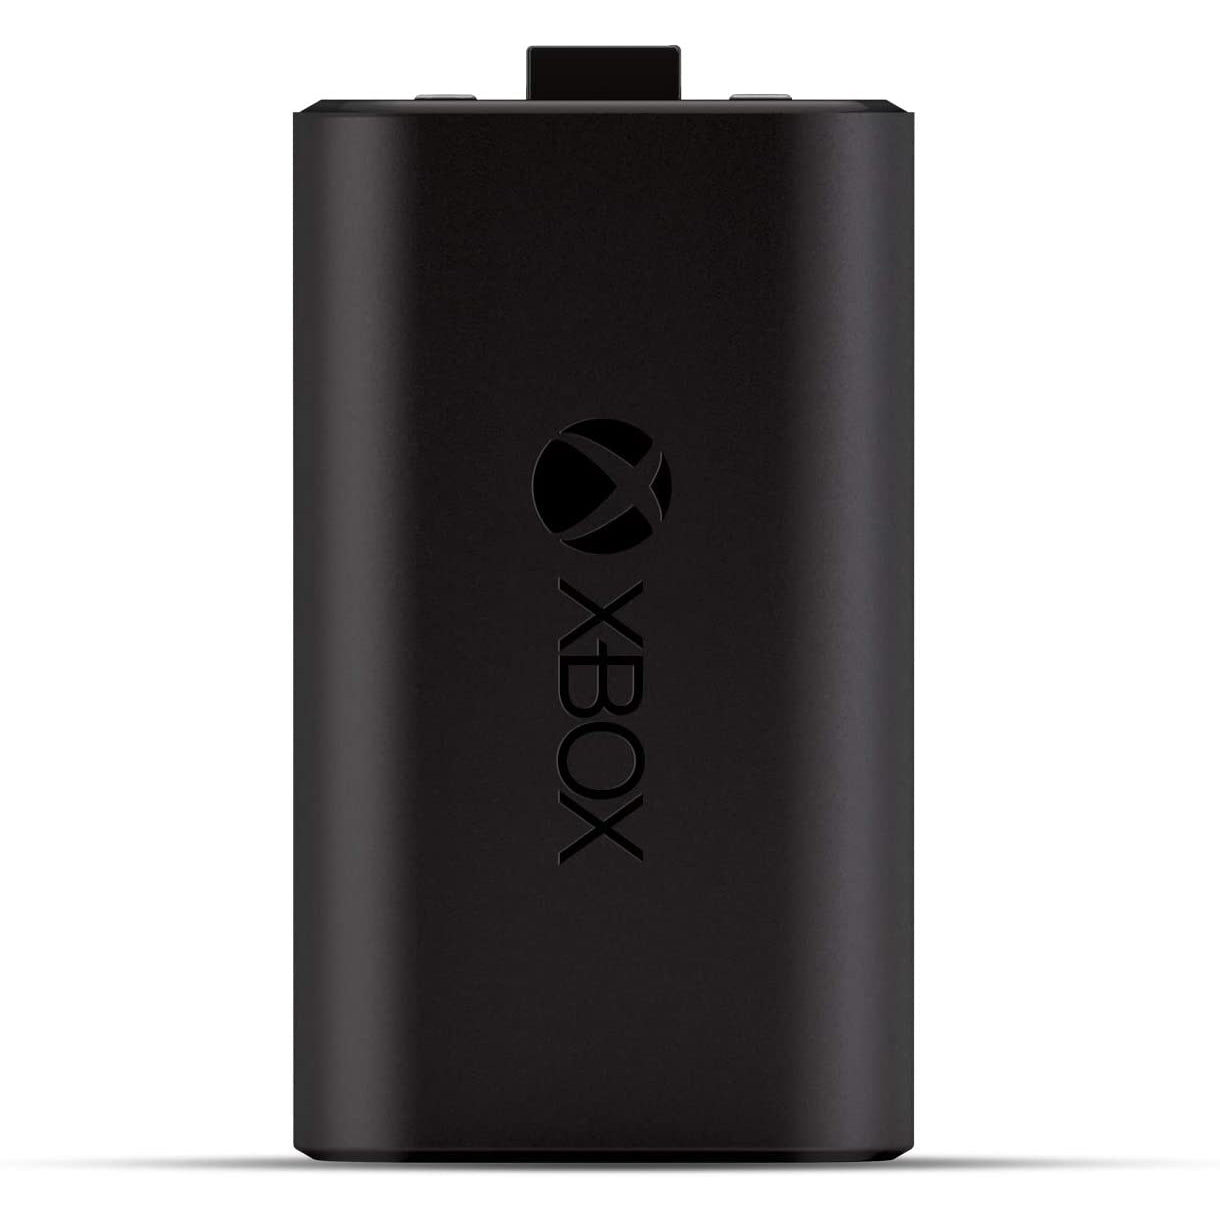 Microsoft S3V-00014 Xbox One Play and Charge Kit Black - Excellent